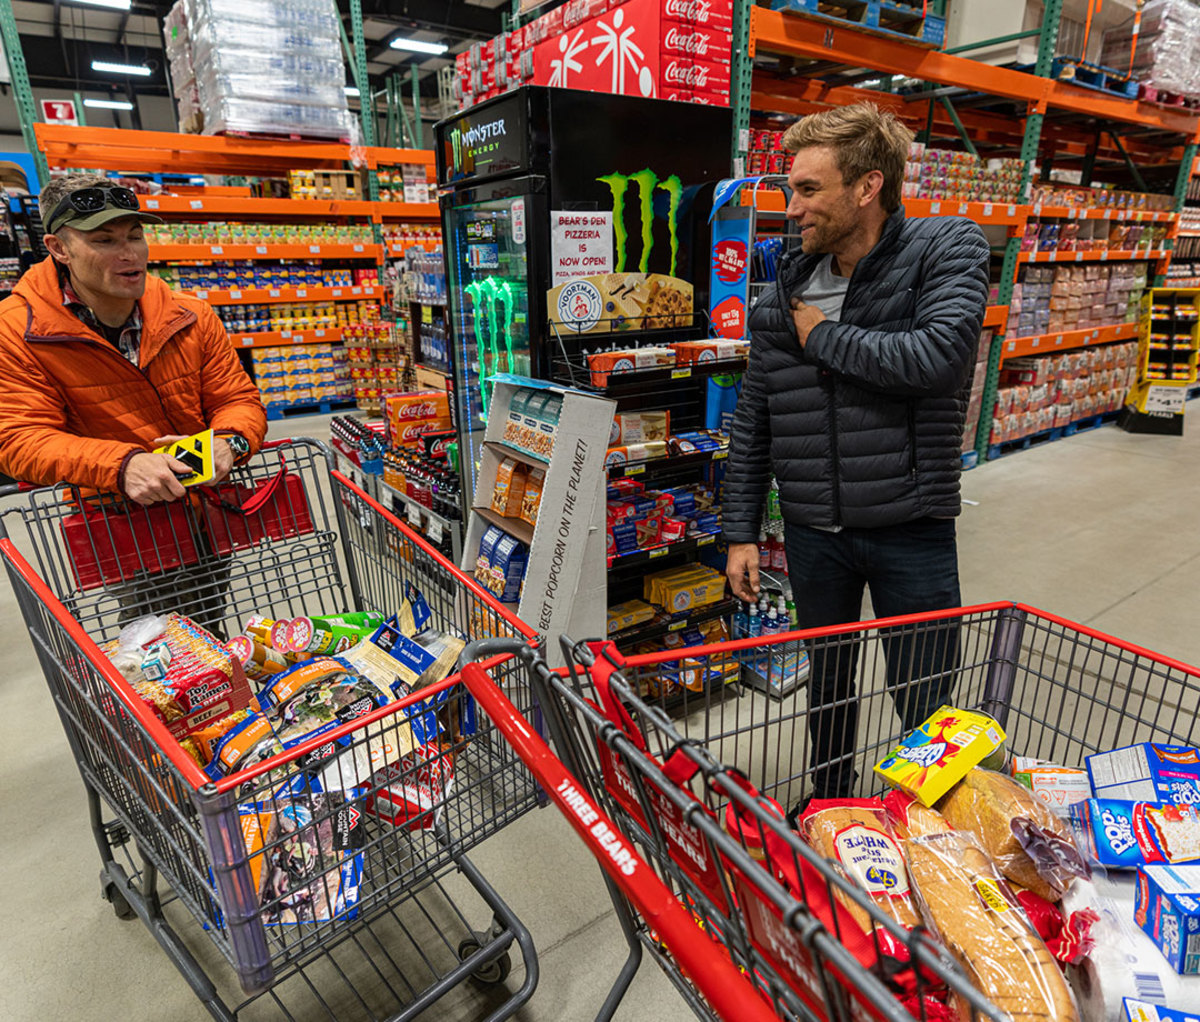 Jason Antin and Mike Chambers grocery shopping for Denali